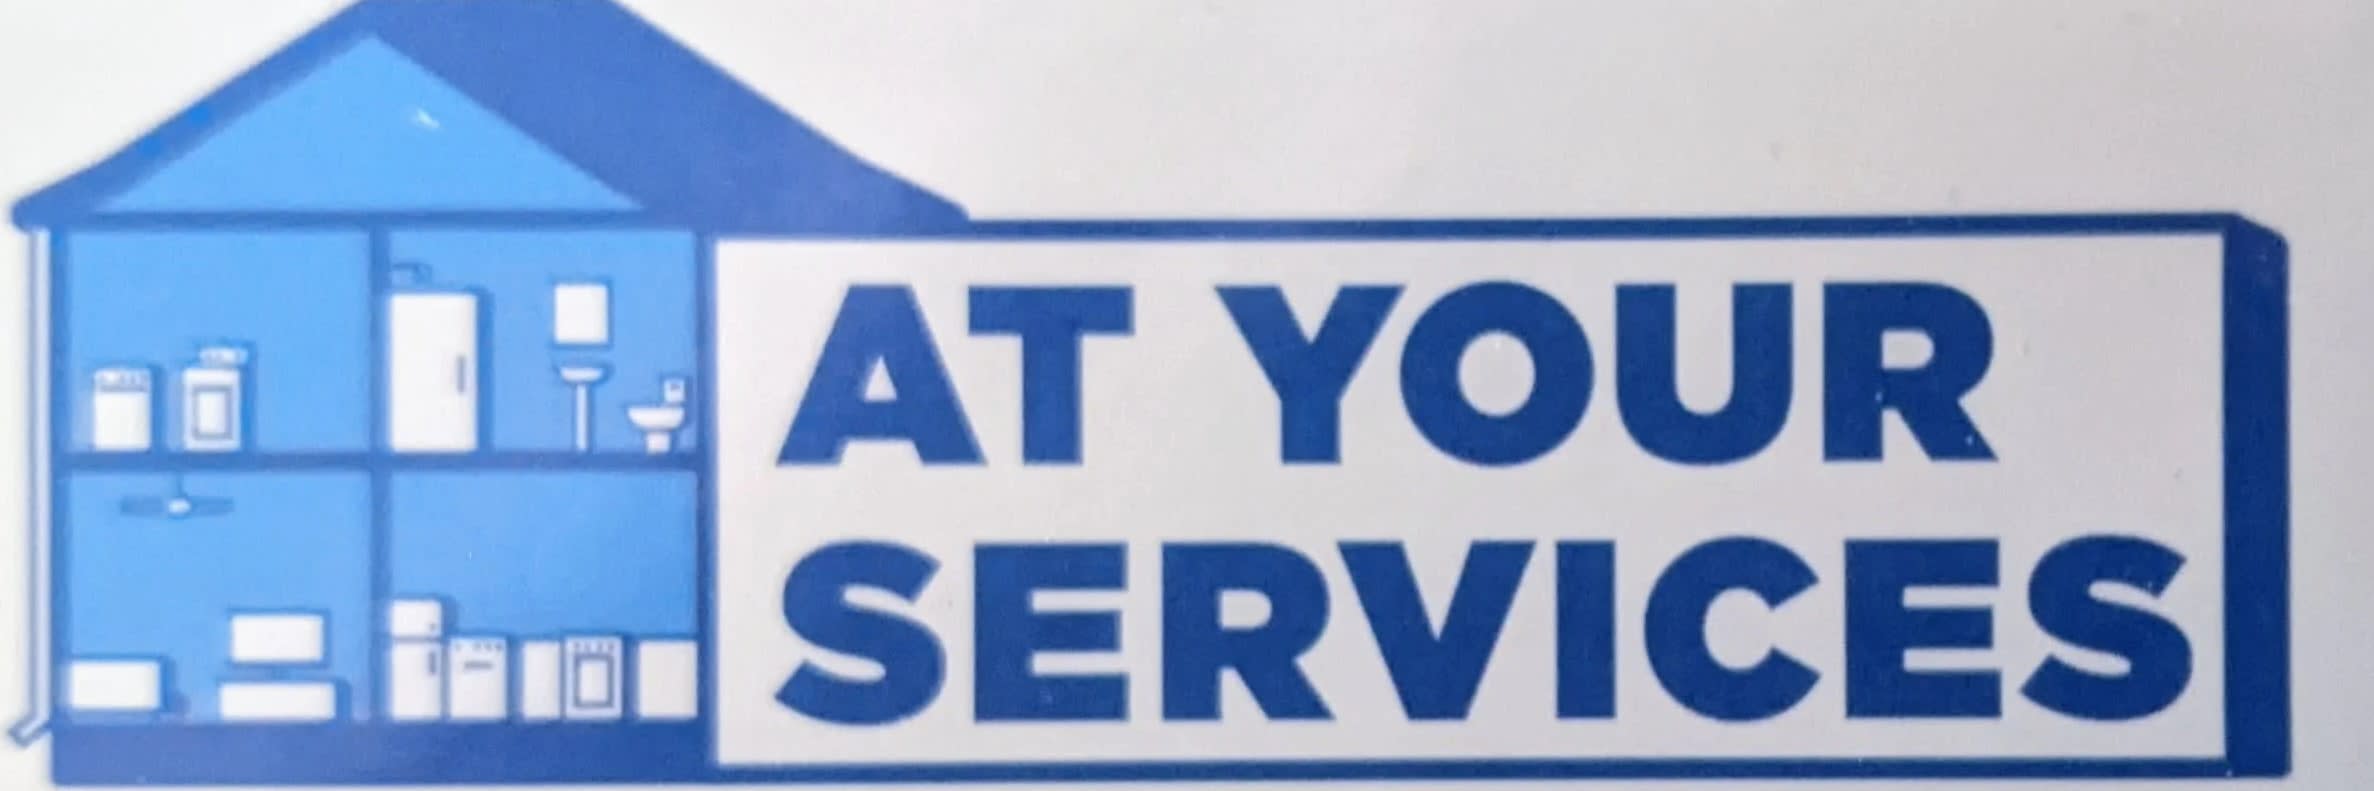 At Your Services